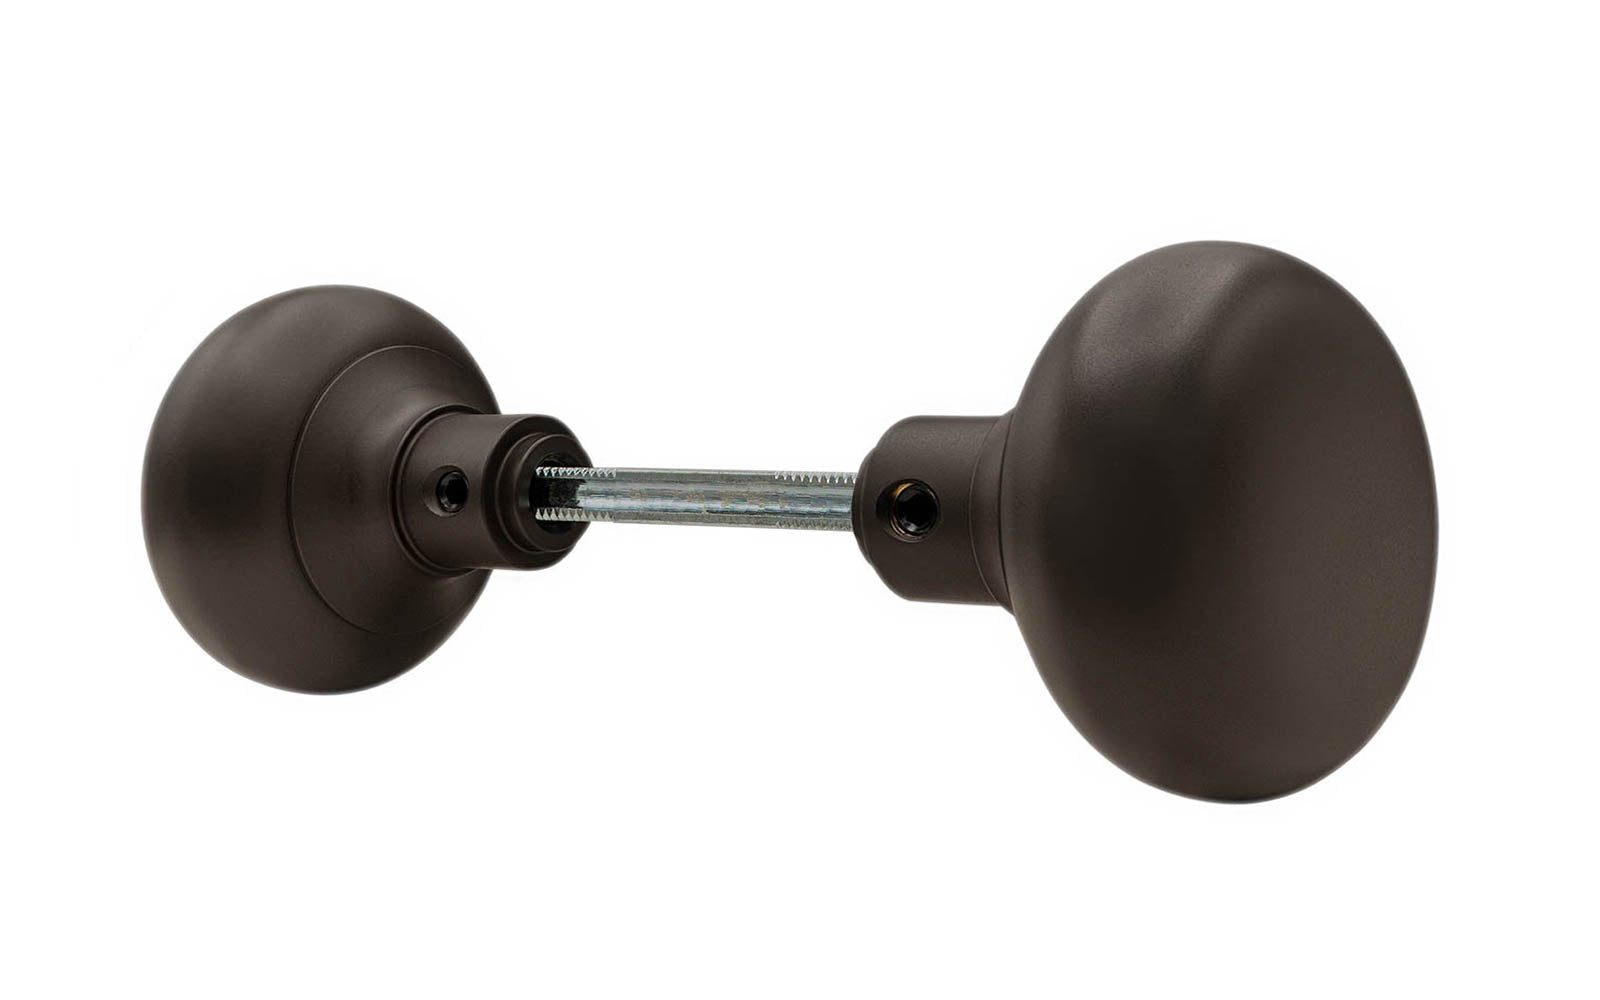 Solid Brass Core Classic Smooth Doorknob Set. Vintage-style Hardware · High quality & solid brass doorknob set with a classic & smooth design. The doorknob itself has a solid brass core making it very durable. Oil Rubbed Bronze Finish